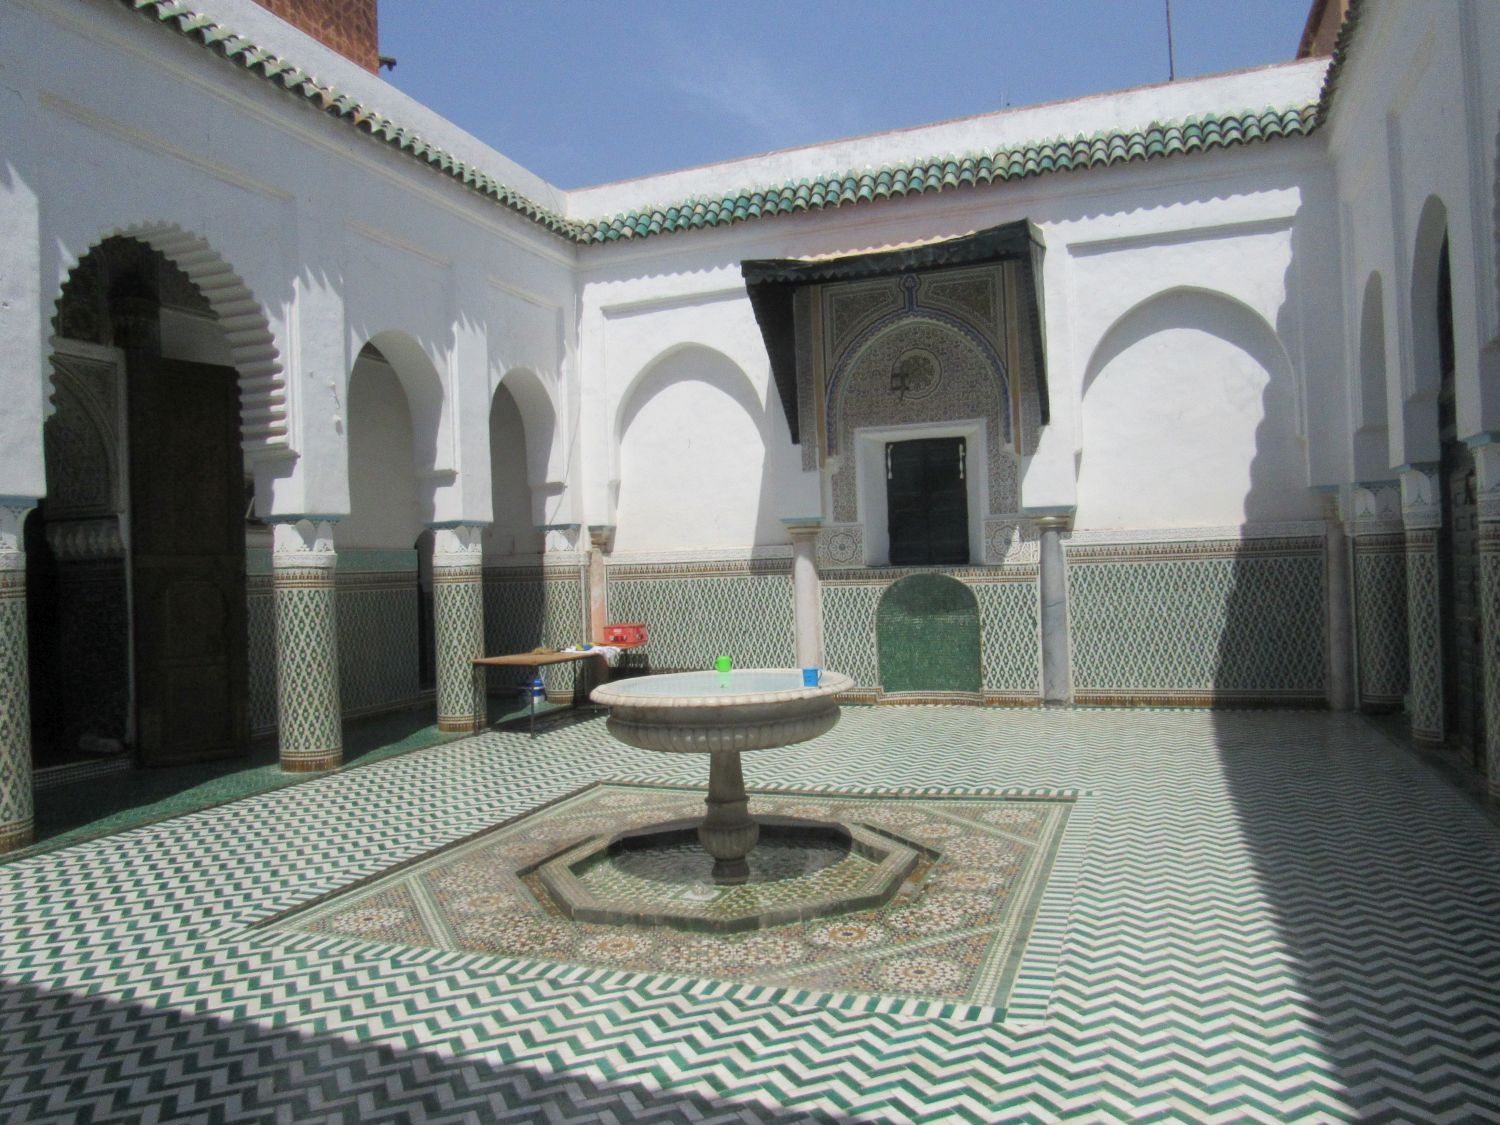 Courtyard view past the fountain toward the elaborately decorate tomb wall